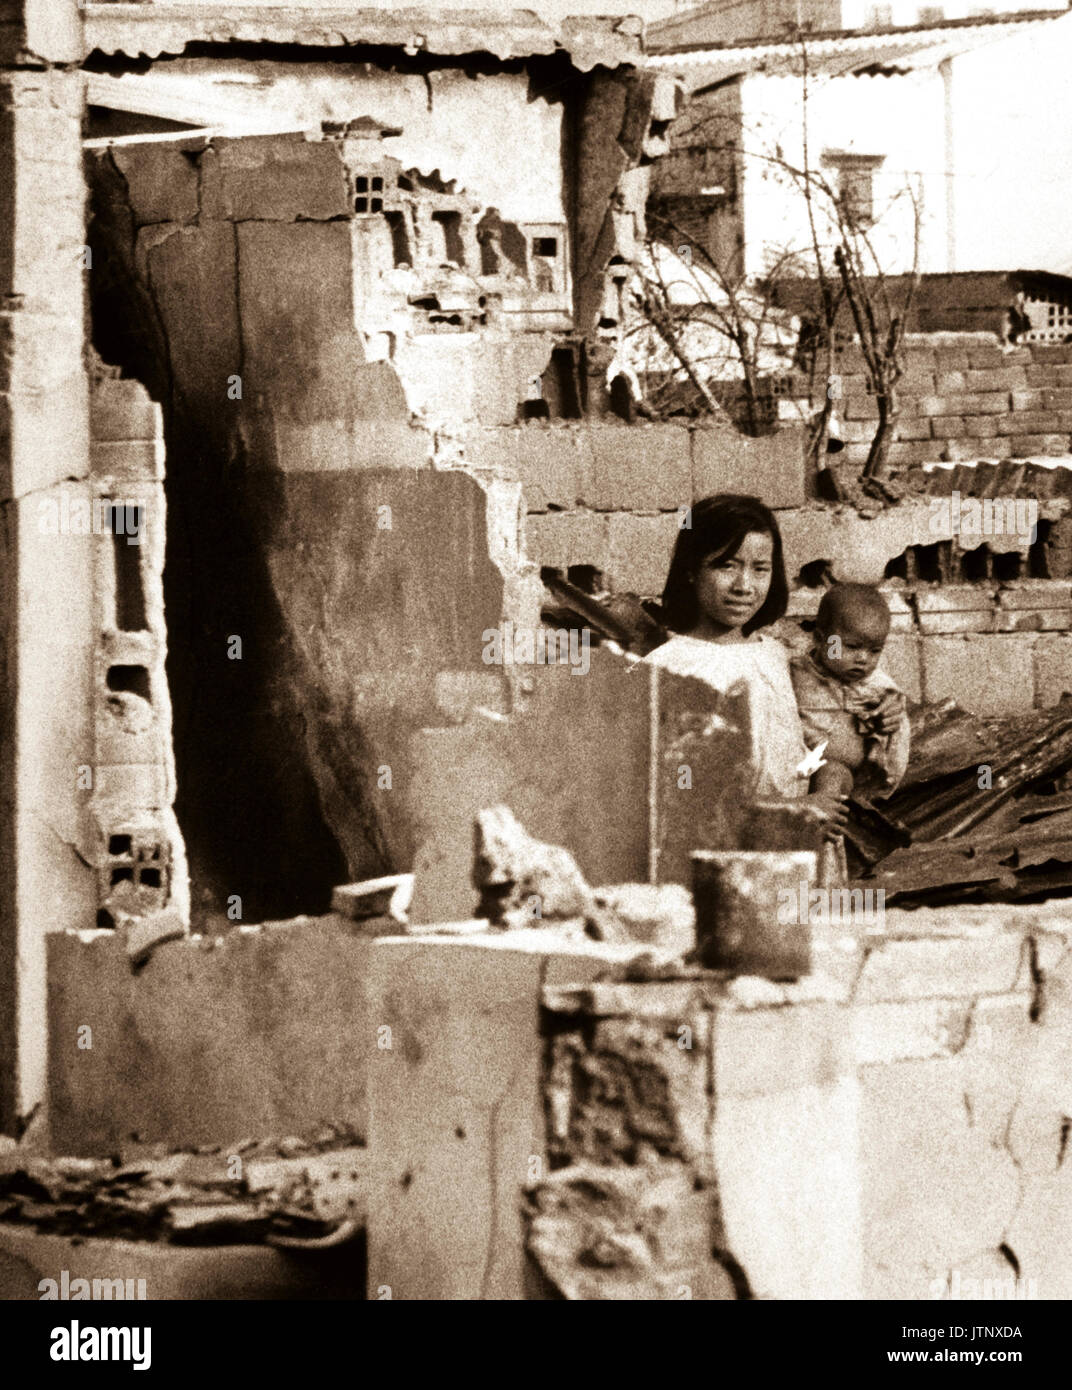 A girl, holding a small child, stands in the ruins of their home after a Viet Cong attack.  Saigon, January 31, 1968.  JUSPAO.  (USIA) NARA FILE #:  306-PSC-68-58 WAR & CONFLICT BOOK #:  422 Stock Photo